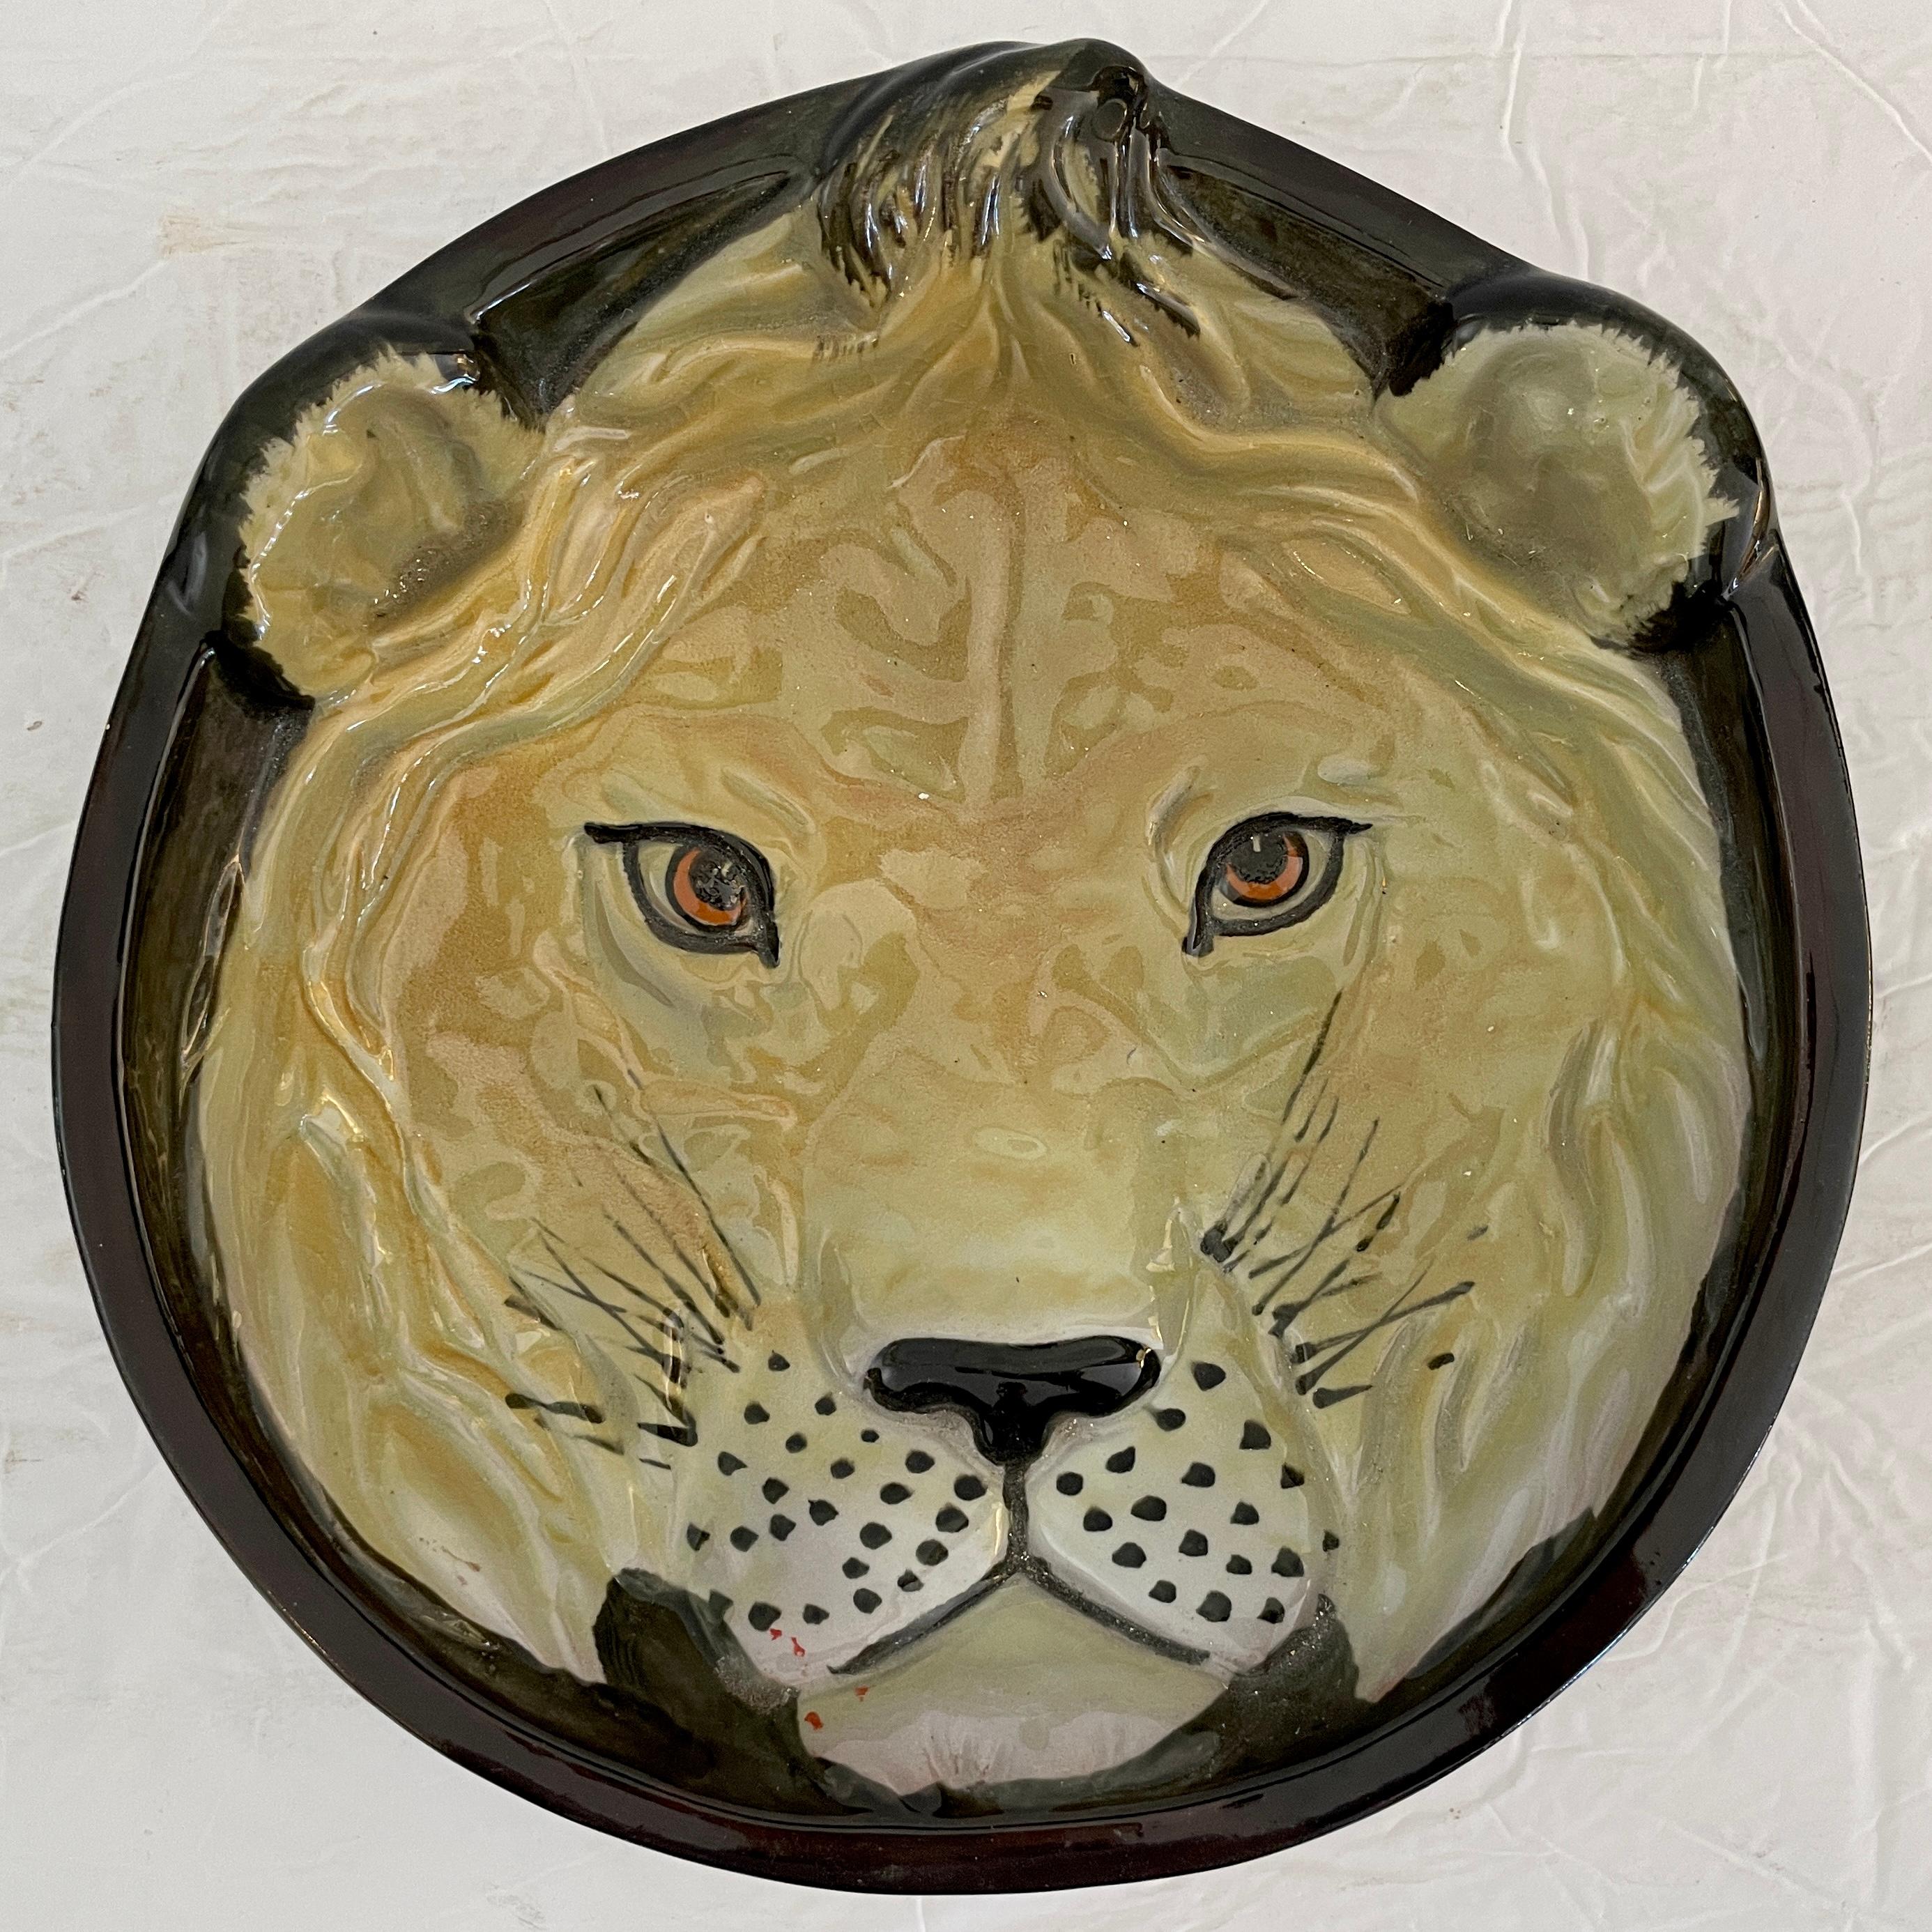 Fun ceramic Boho Chic serving bowl of a lion's face paint and motifs. Great addition to your bar and parties. This is part of a 4 series animal bowls, find them on our listings and collect them all!